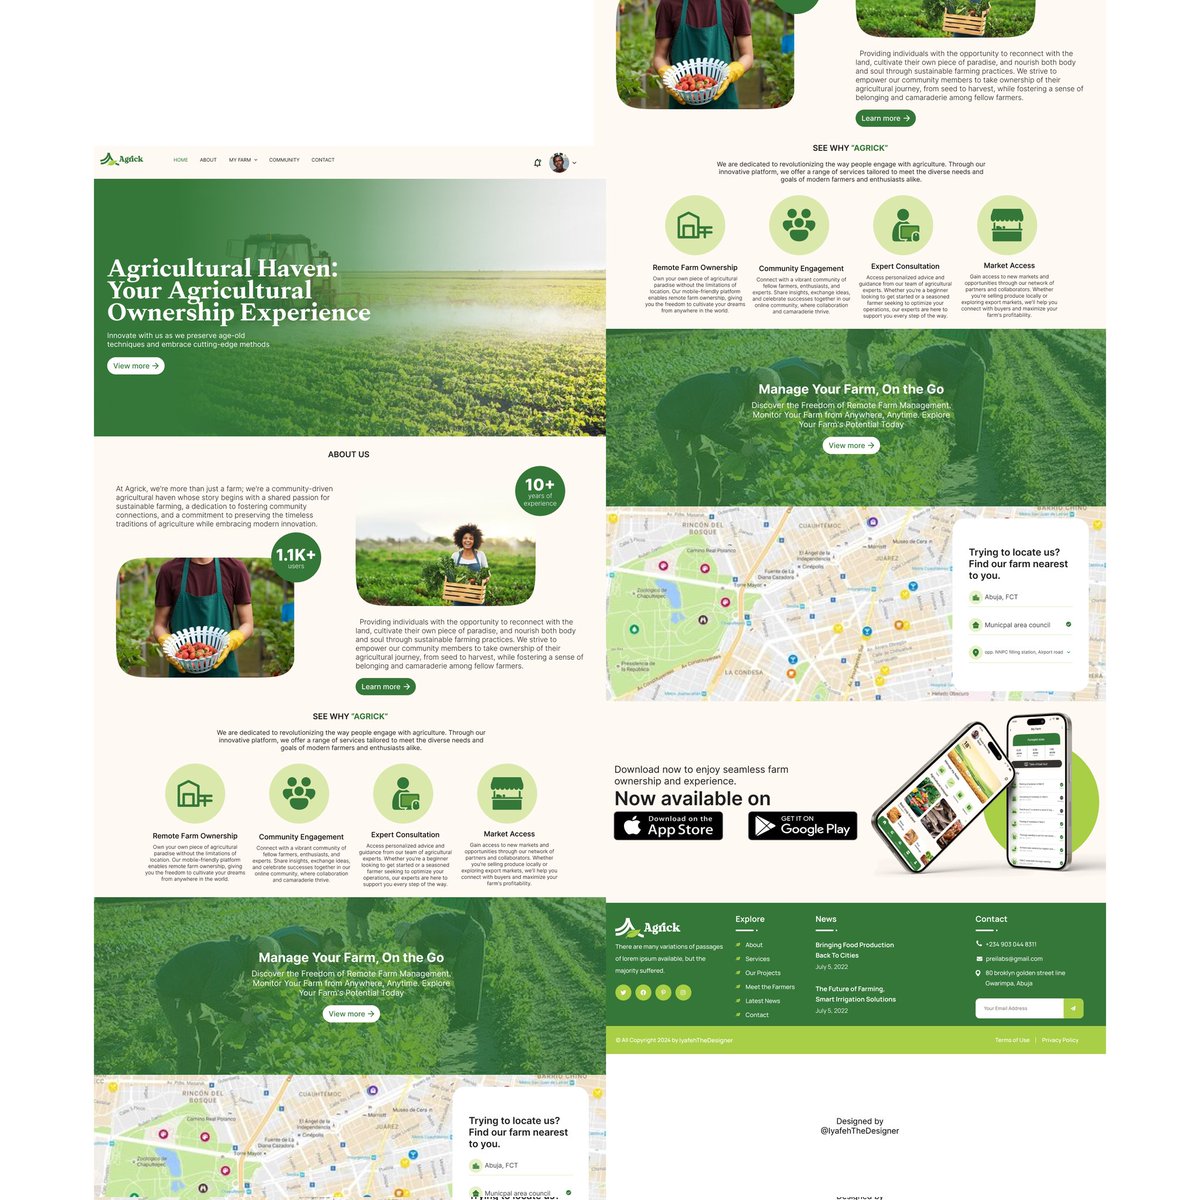 Agrick is a company that aims at helping individuals own and manage farm regardless of distance. 

This is a landing page web design
What are your thoughts on this?